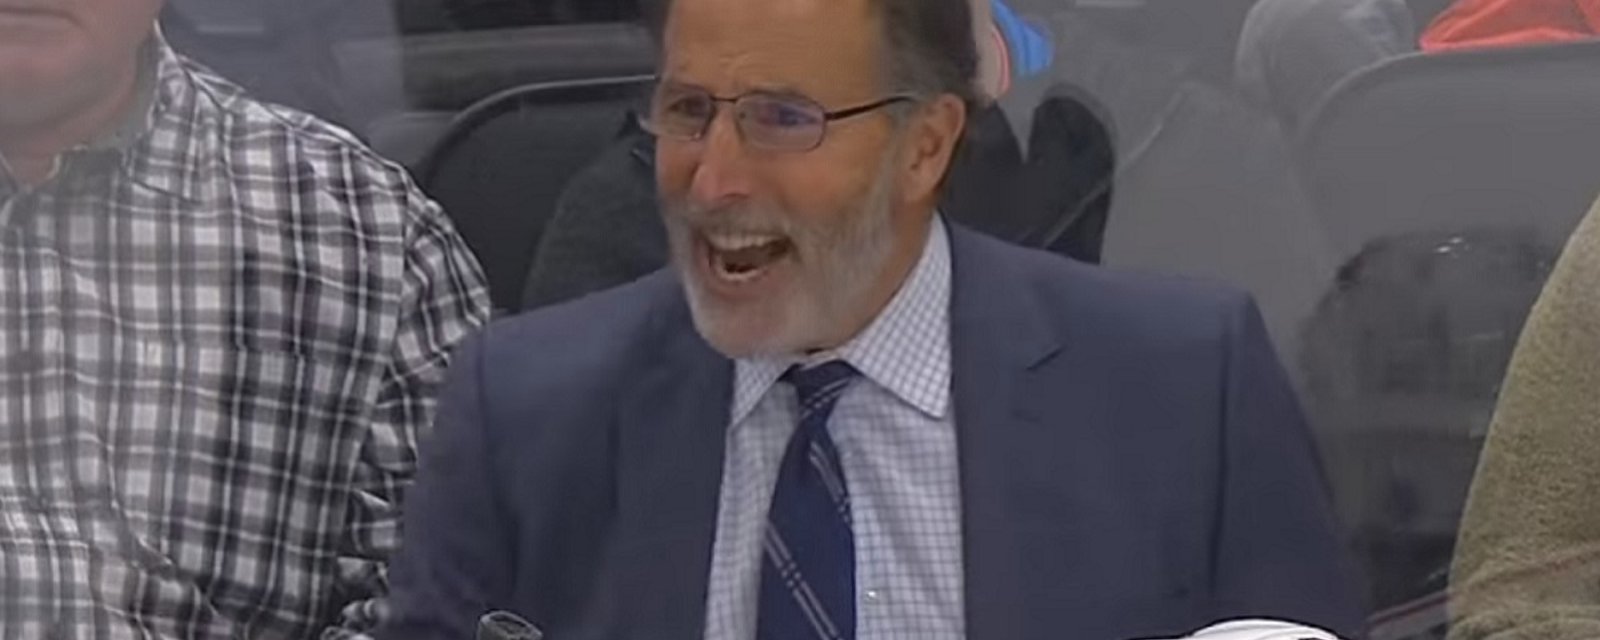 Tortorella loses it after officials make one of the worst calls of the season.